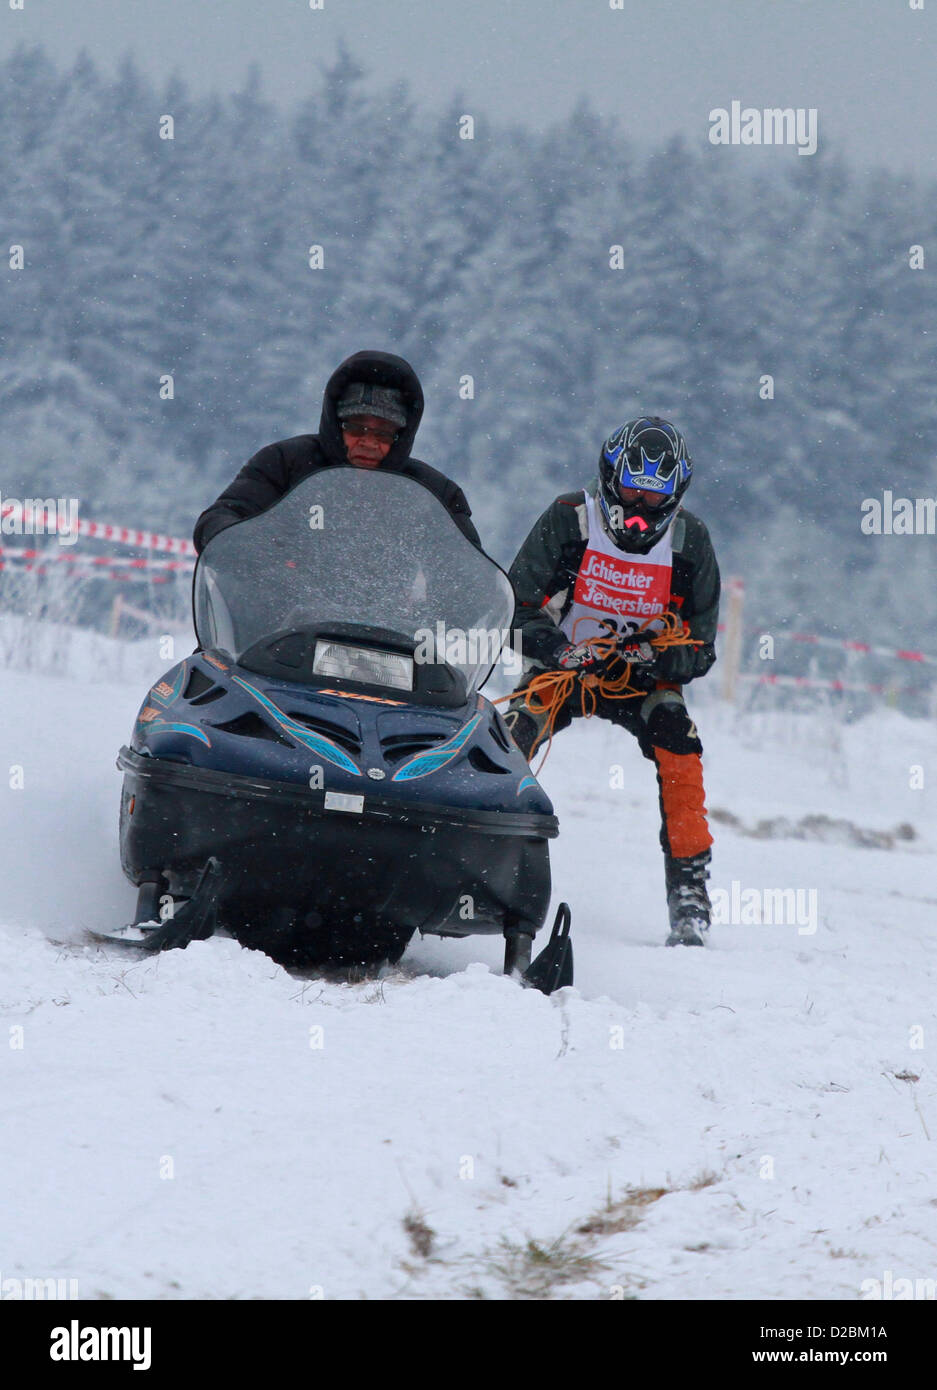 Juergen Kurkiwicz pulls a snow boarder with a motor sleigh across an obstacle course in Elend, Germany, 19 January 2013. More than 100 contestants participate in this curious race which is based on a Scandinavian winter sports concept. Skiers are being pulled across an obstacle course either with animals or motorised vehicles. Photo: Matthias Bein Stock Photo